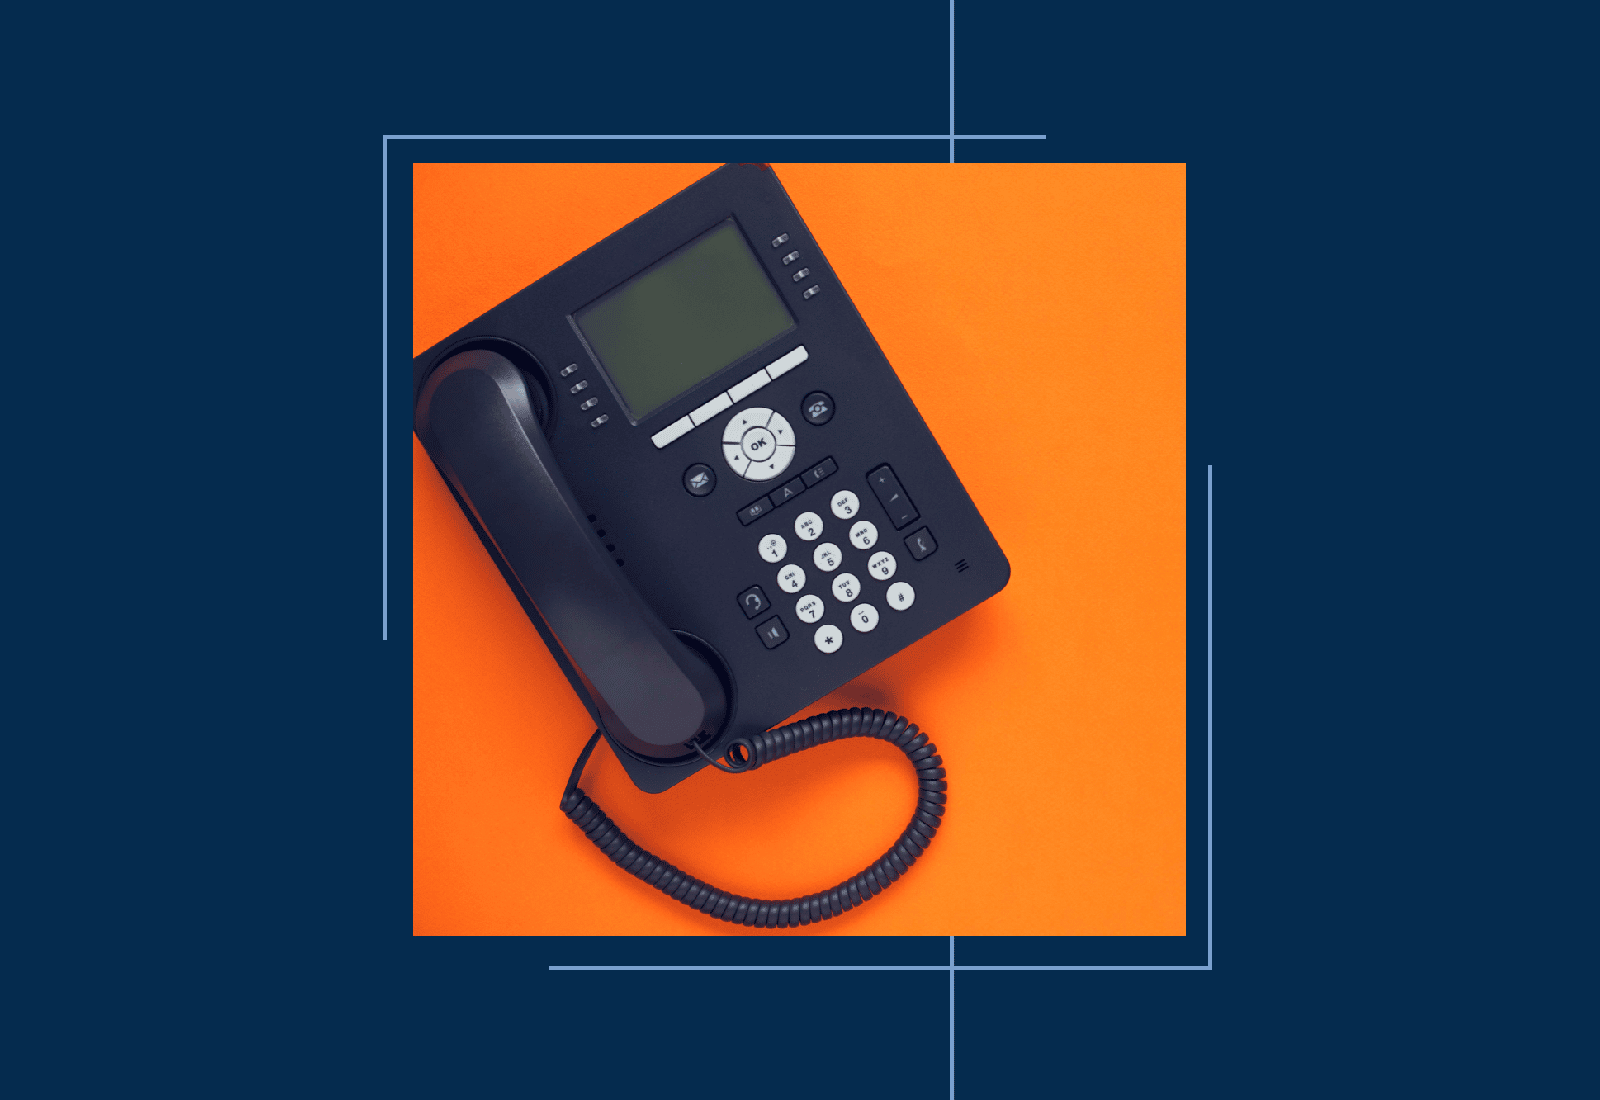 office phone on orange background inside a square